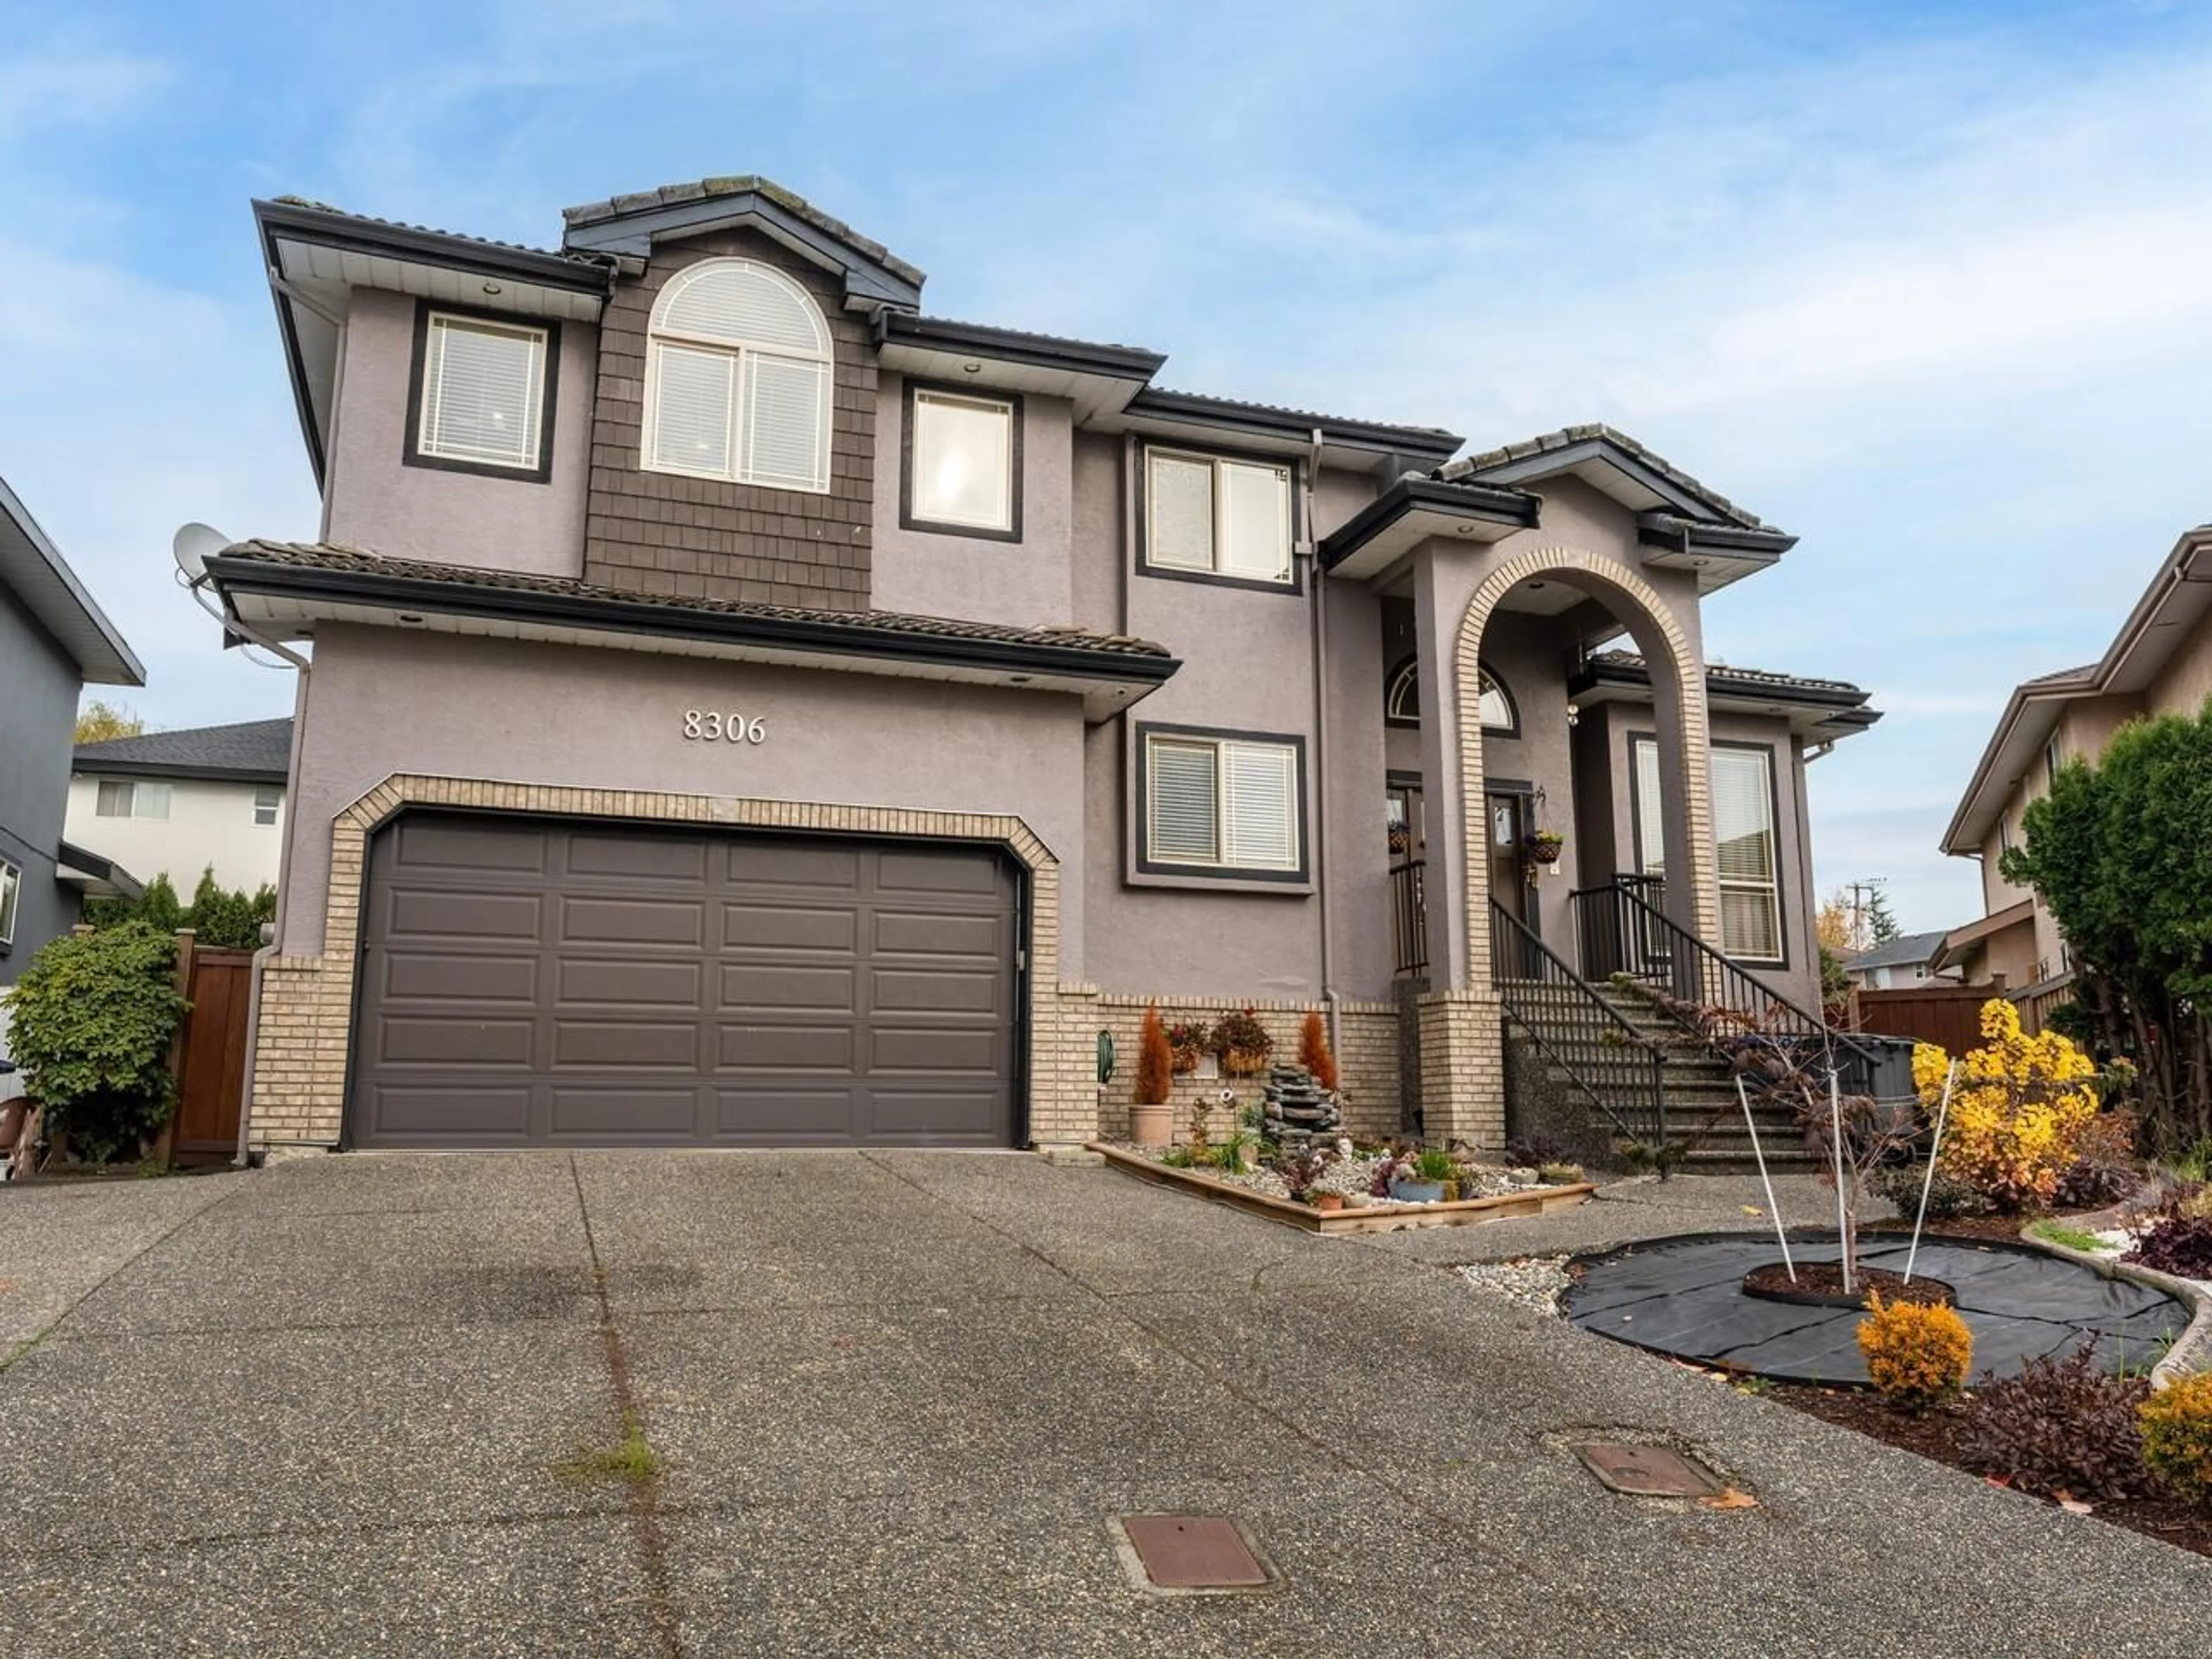 Frontside or backside of a home for 8306 151A STREET, Surrey British Columbia V3S8R1